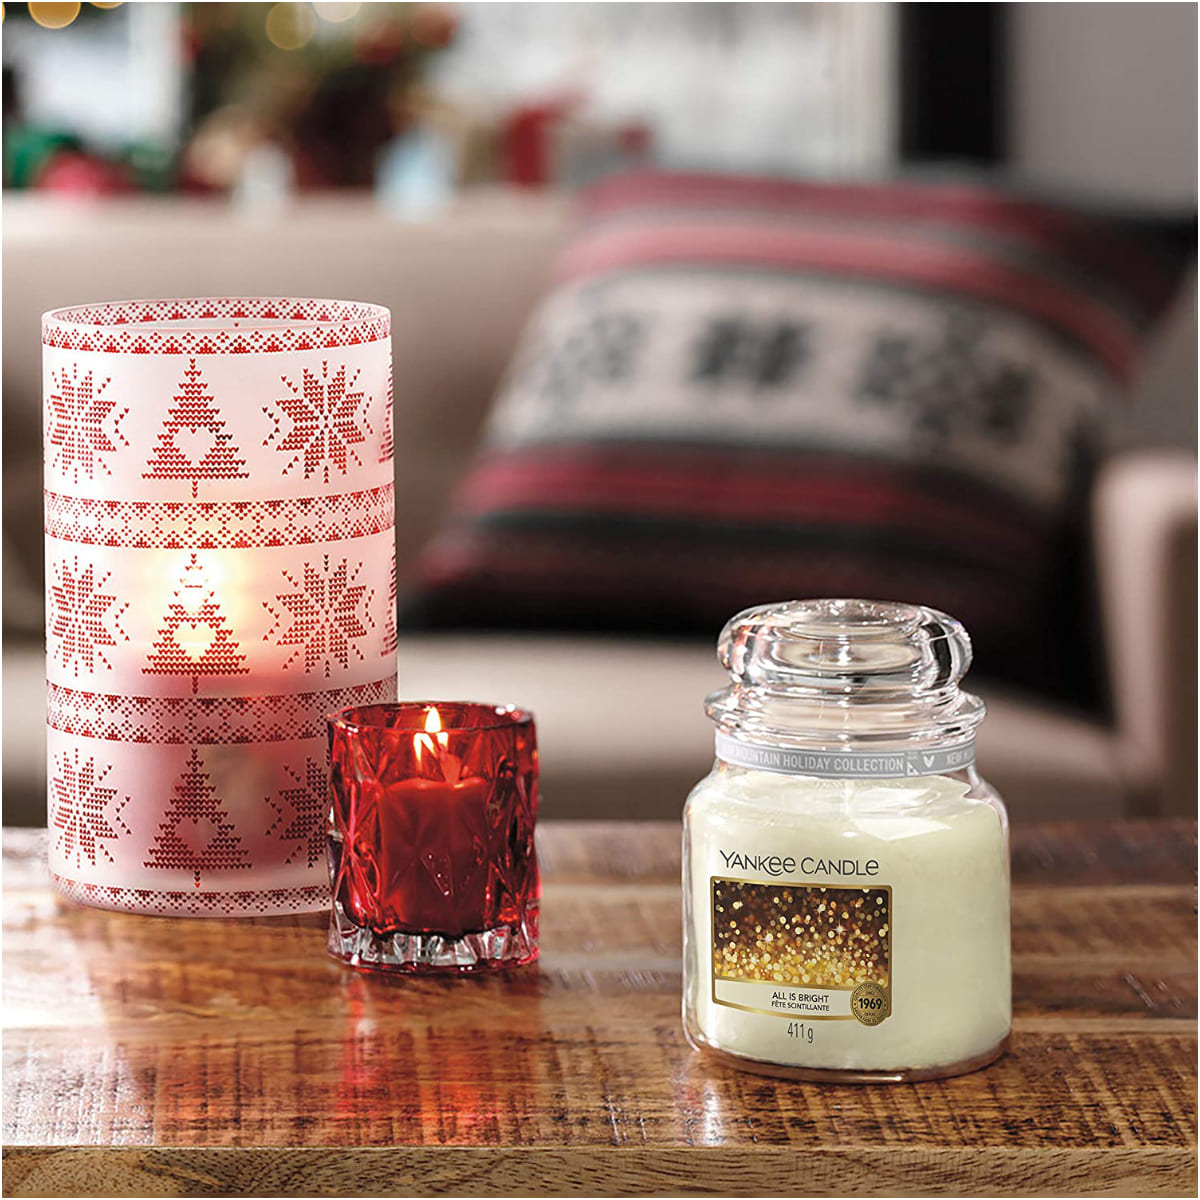 Vela All is Bright Yankee Candle